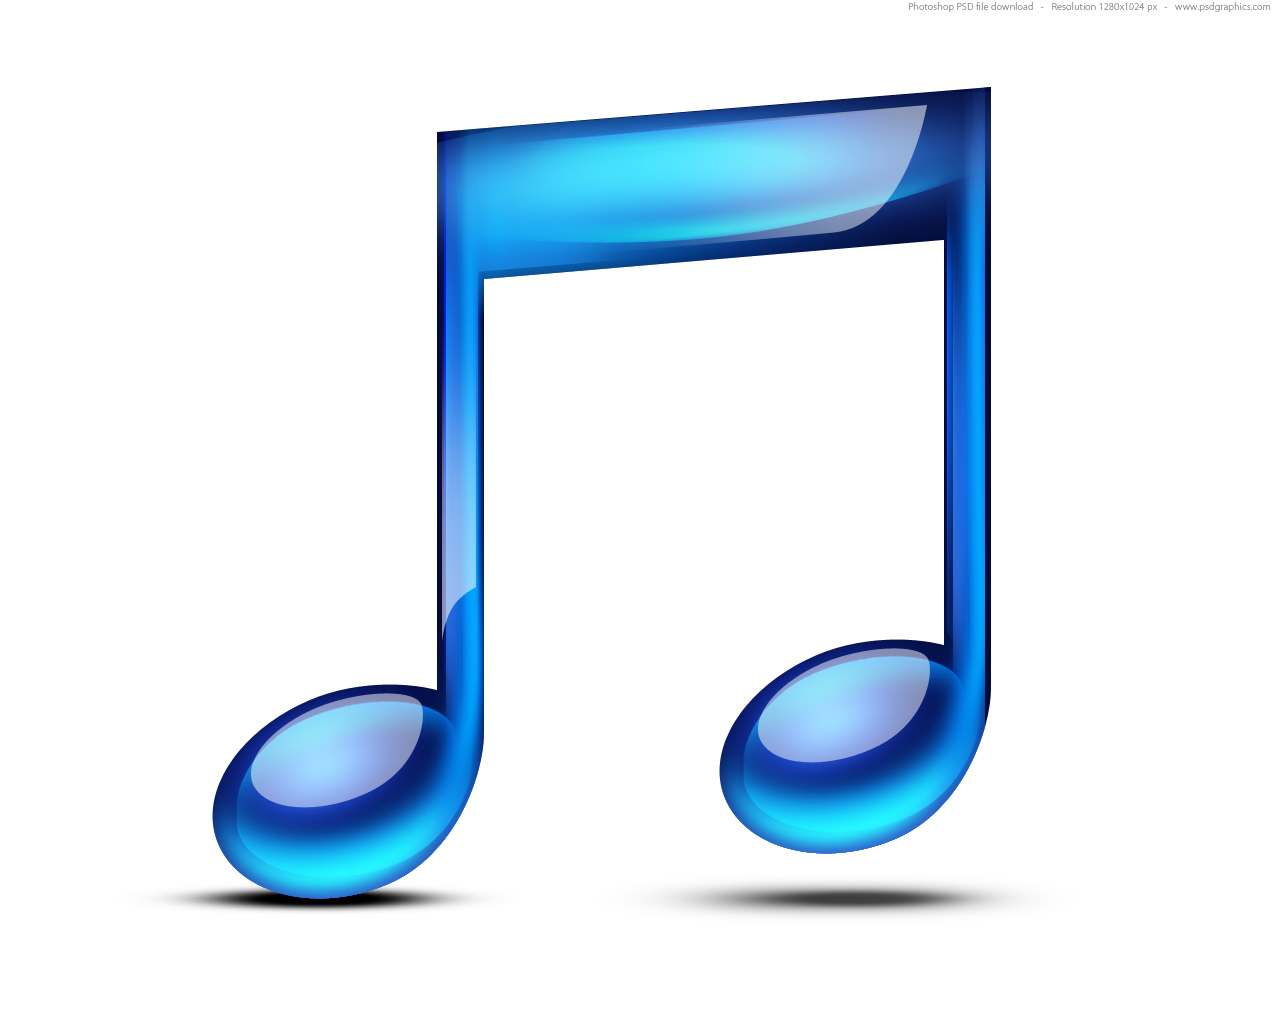 Music note icon (PSD) | PSDGraphics